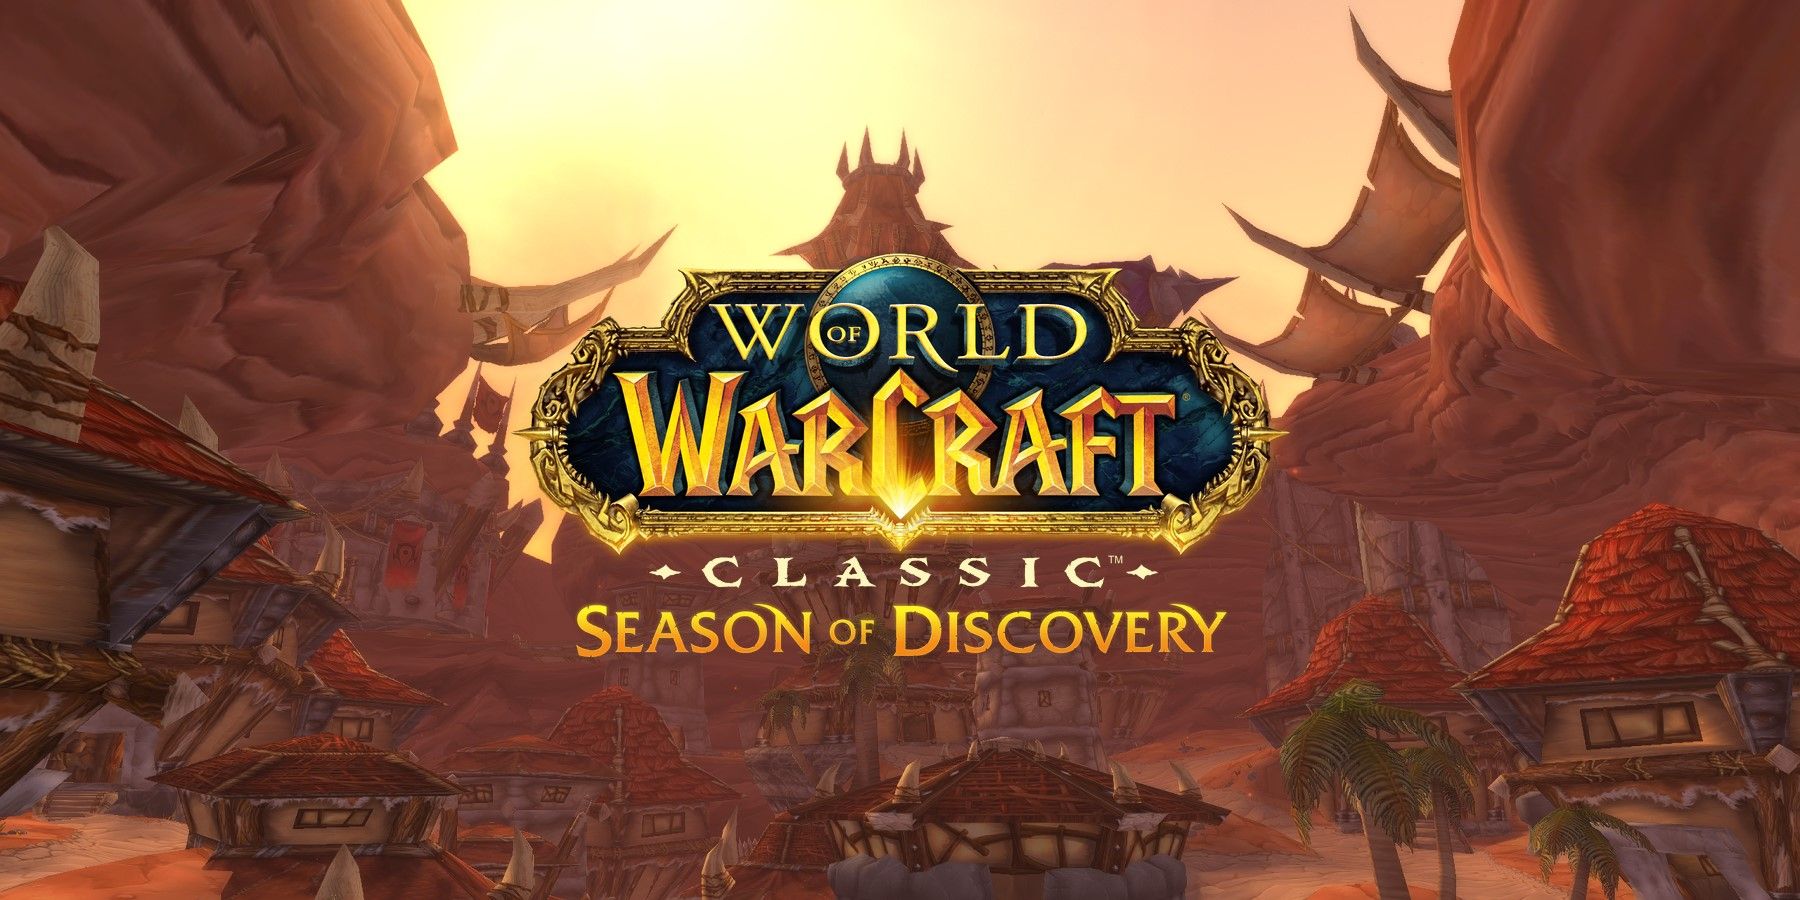 orgrimmar in world of warcraft classic with the season of discovery logo on it